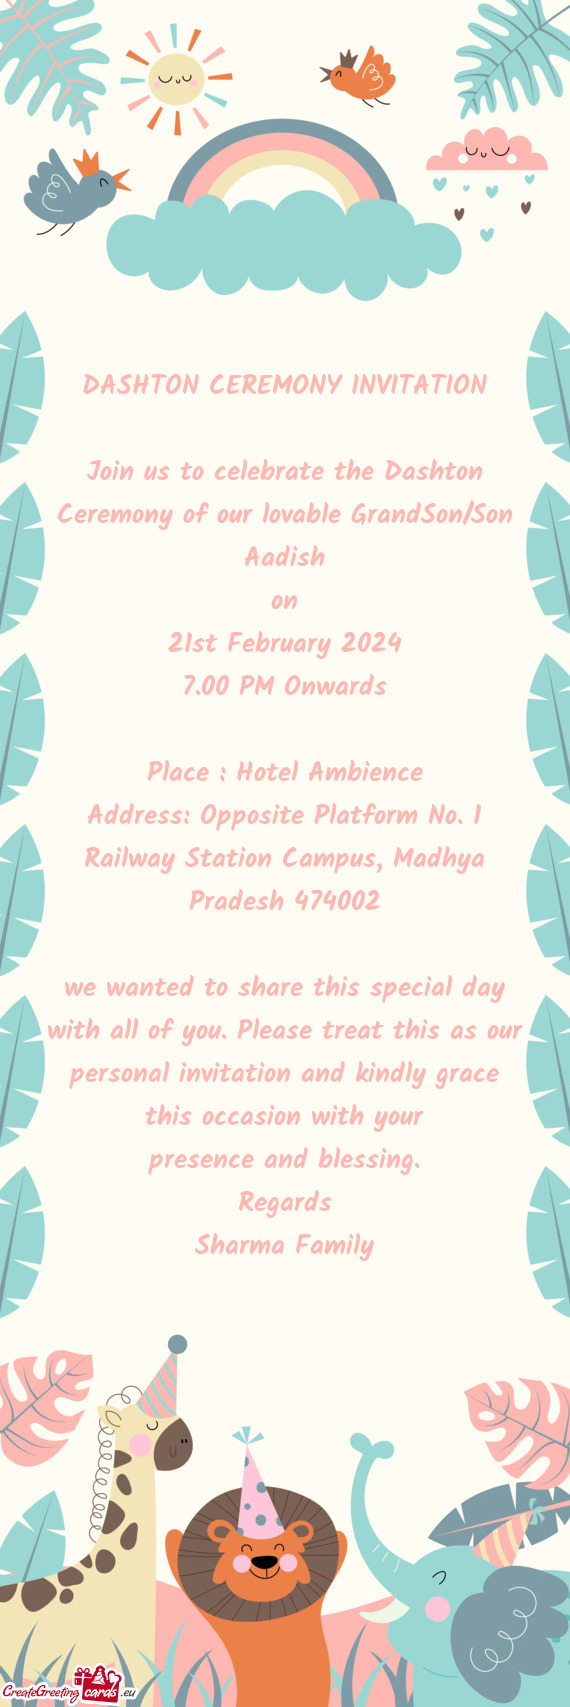 Join us to celebrate the Dashton Ceremony of our lovable GrandSon/Son Aadish